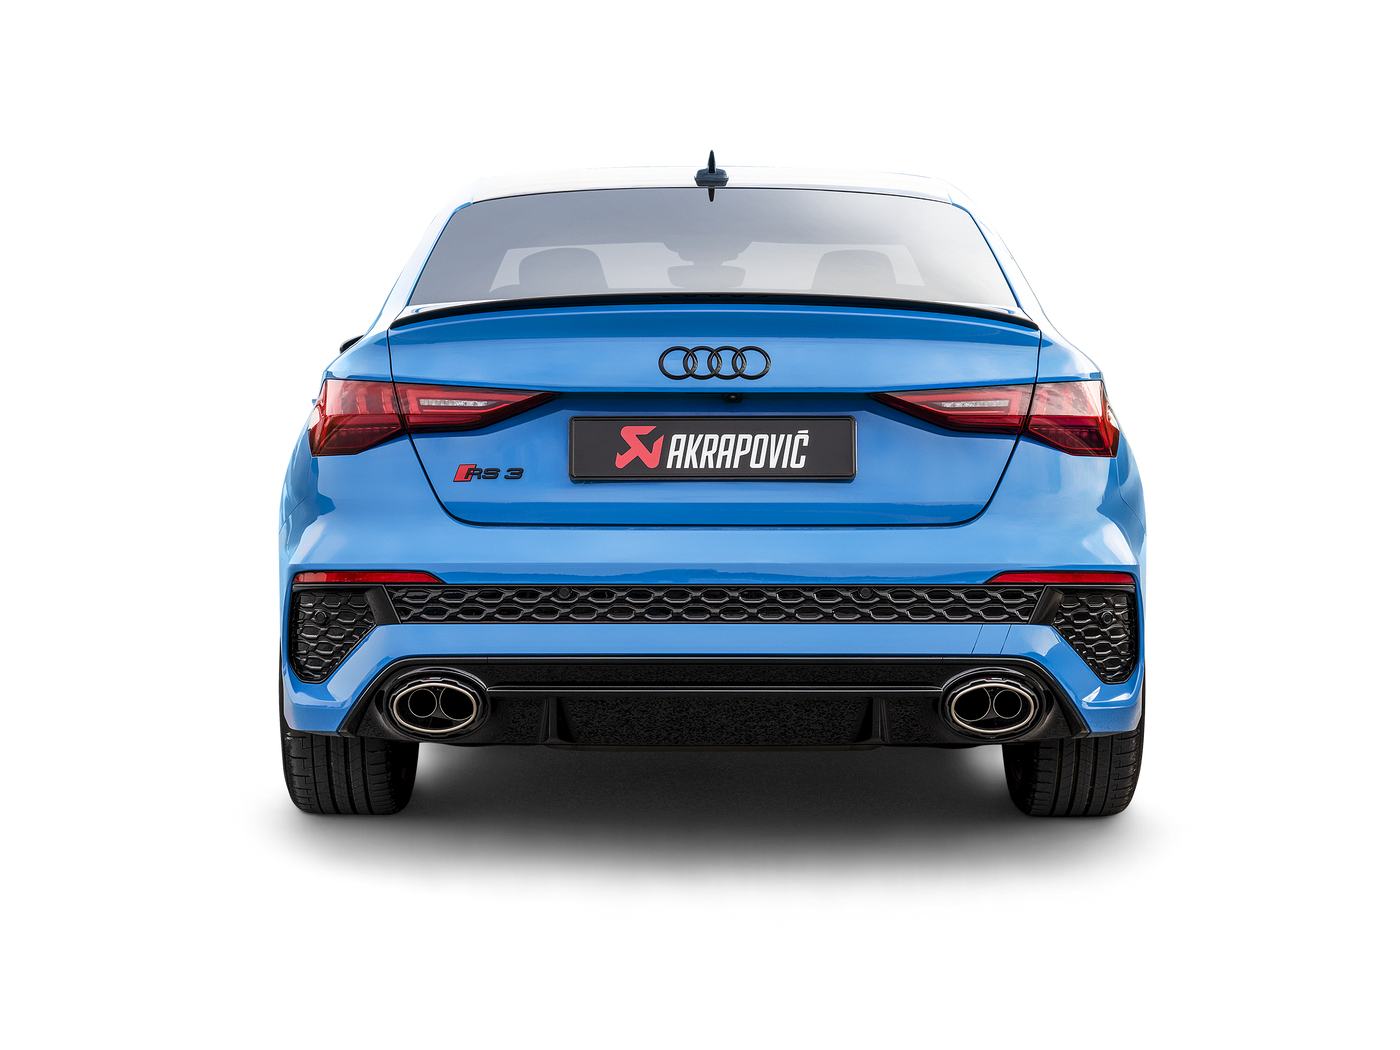 An image showing the rear quarter of both Sedan and Sport back versions of the Audi RS 3 8Y. Both fitted with Akrapovič Evolution Line exhaust systems, and Akrapovič carbon fibre rear diffusers.